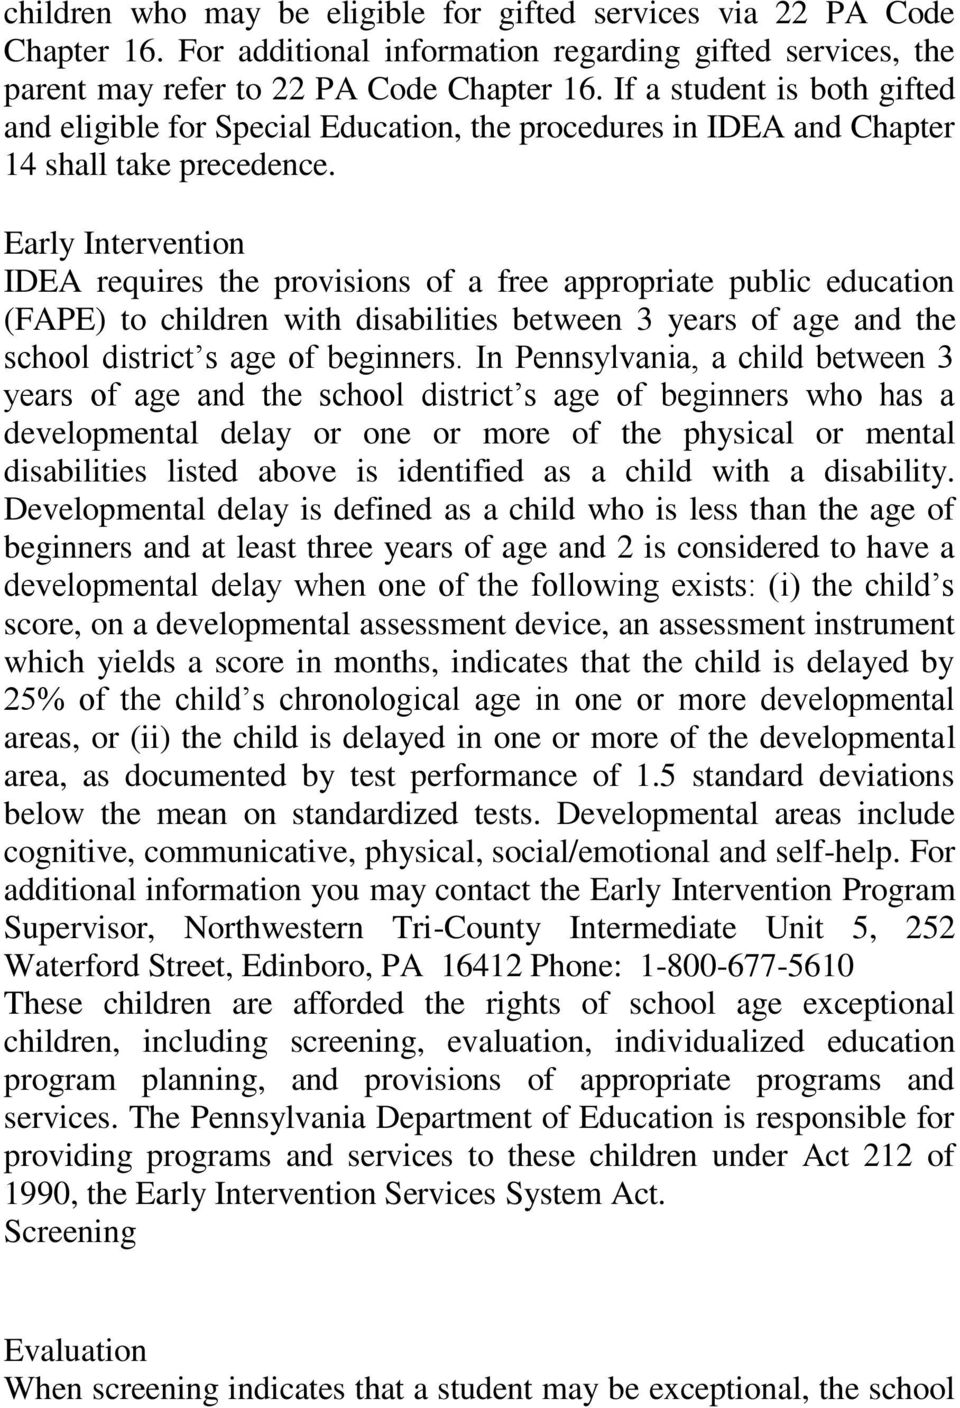 Early Intervention IDEA requires the provisions of a free appropriate public education (FAPE) to children with disabilities between 3 years of age and the school district s age of beginners.